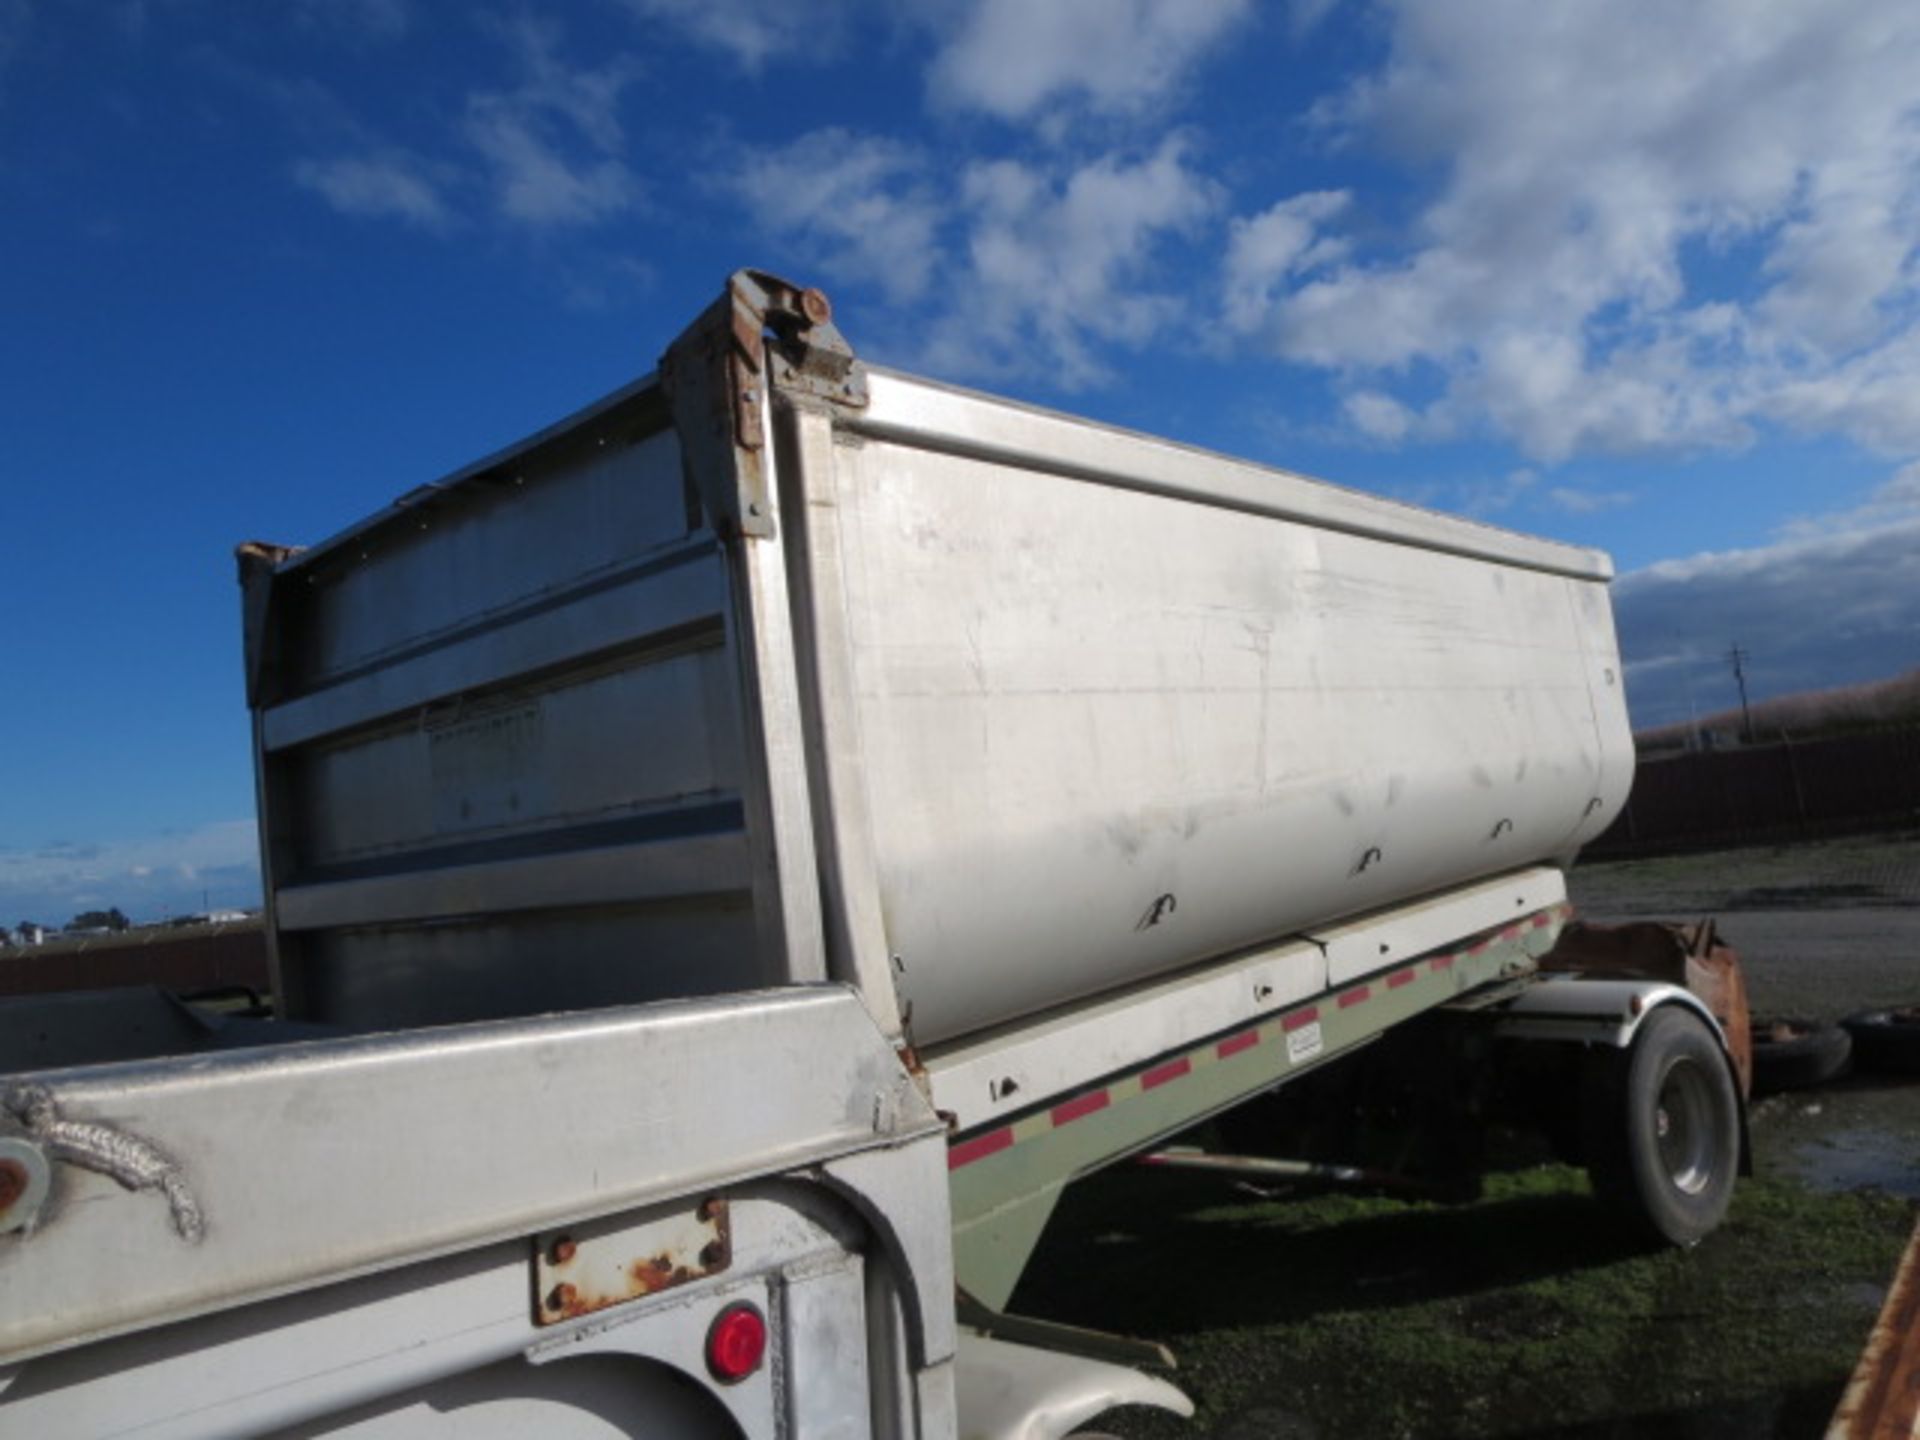 2000 Wellco Transfer Trailer, VIN 1W9PC32D4YD020444 - Image 3 of 9